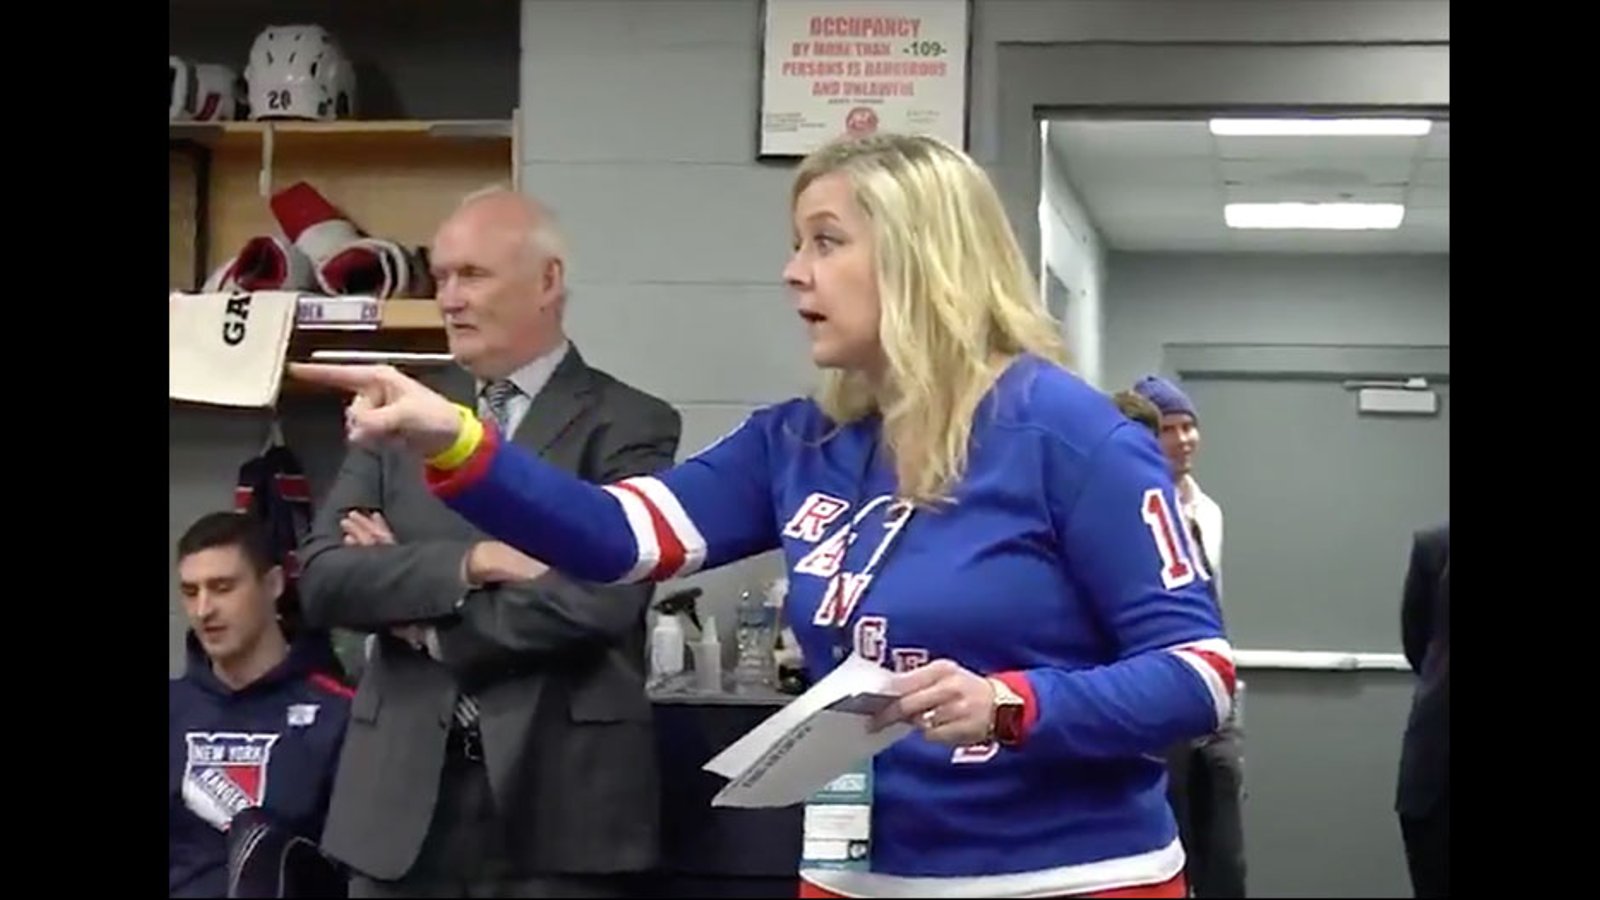 Ryan Strome’s Mom goes viral with incredible pregame speech and lineup announcement